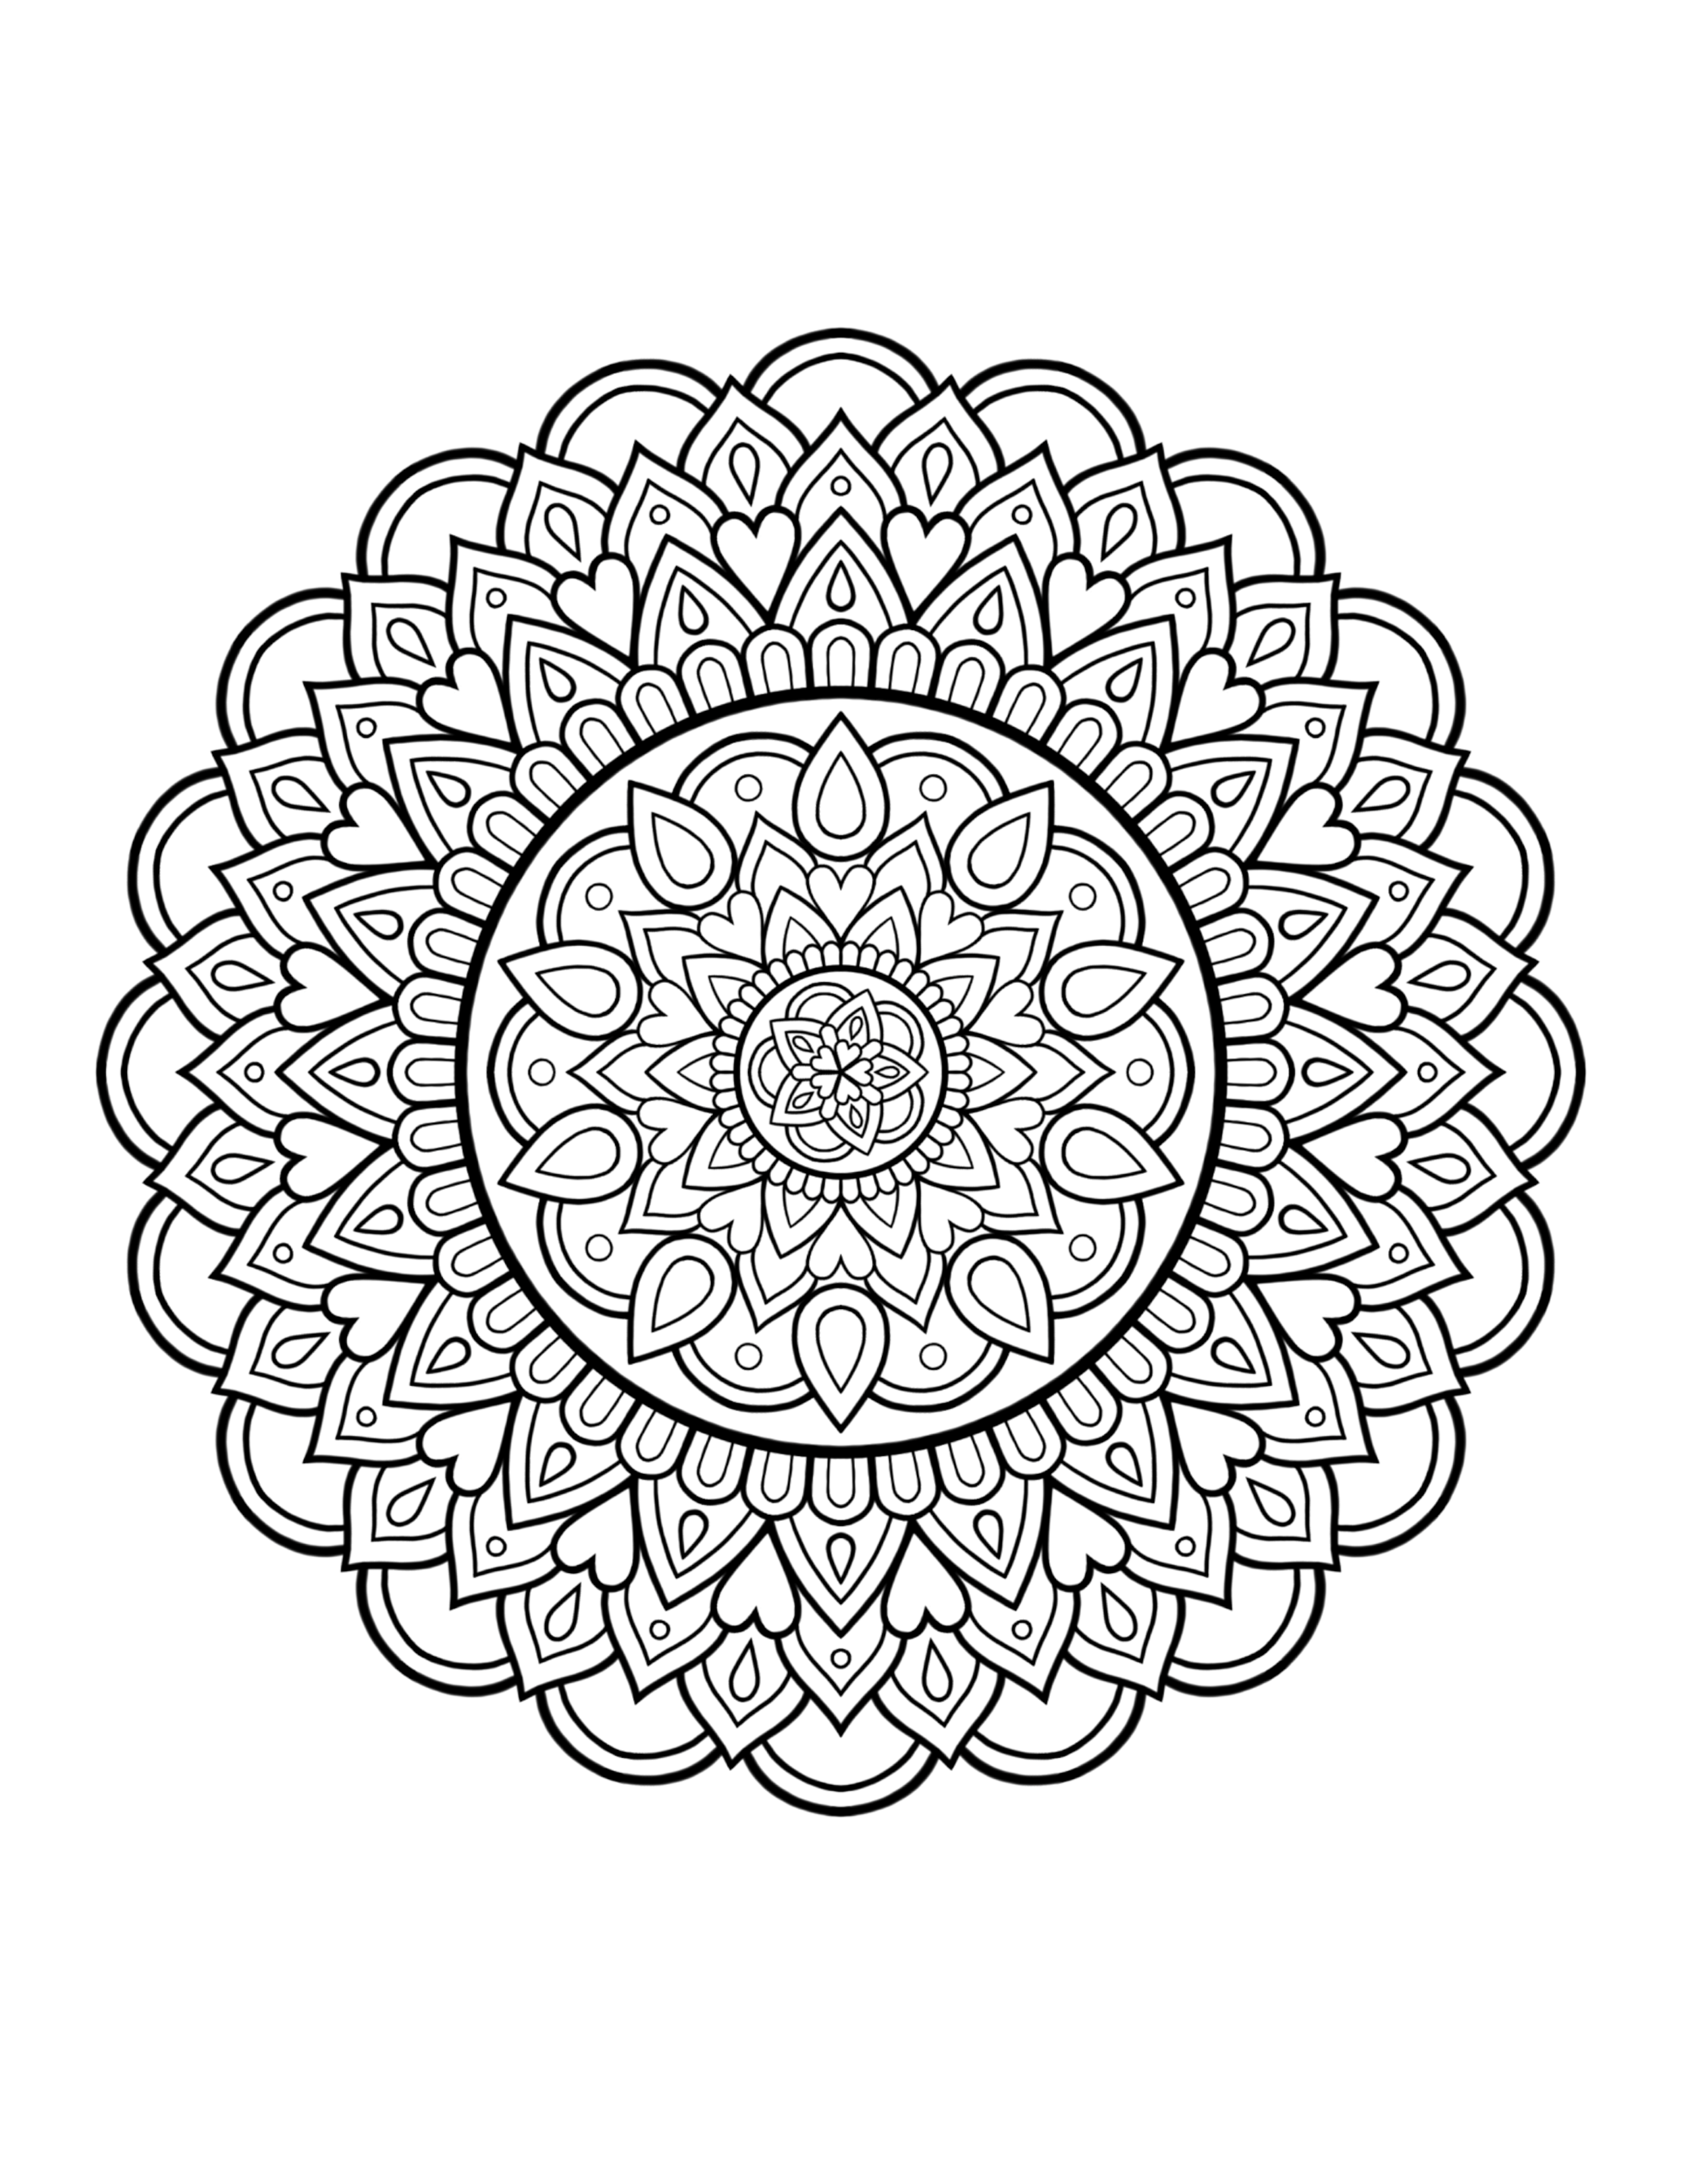 BONUS 60 free Mandala colouring pages Mandala colouring book for adults PDF to print Relax & Dream Night Edition with beautiful Mandalas for Stress relief 